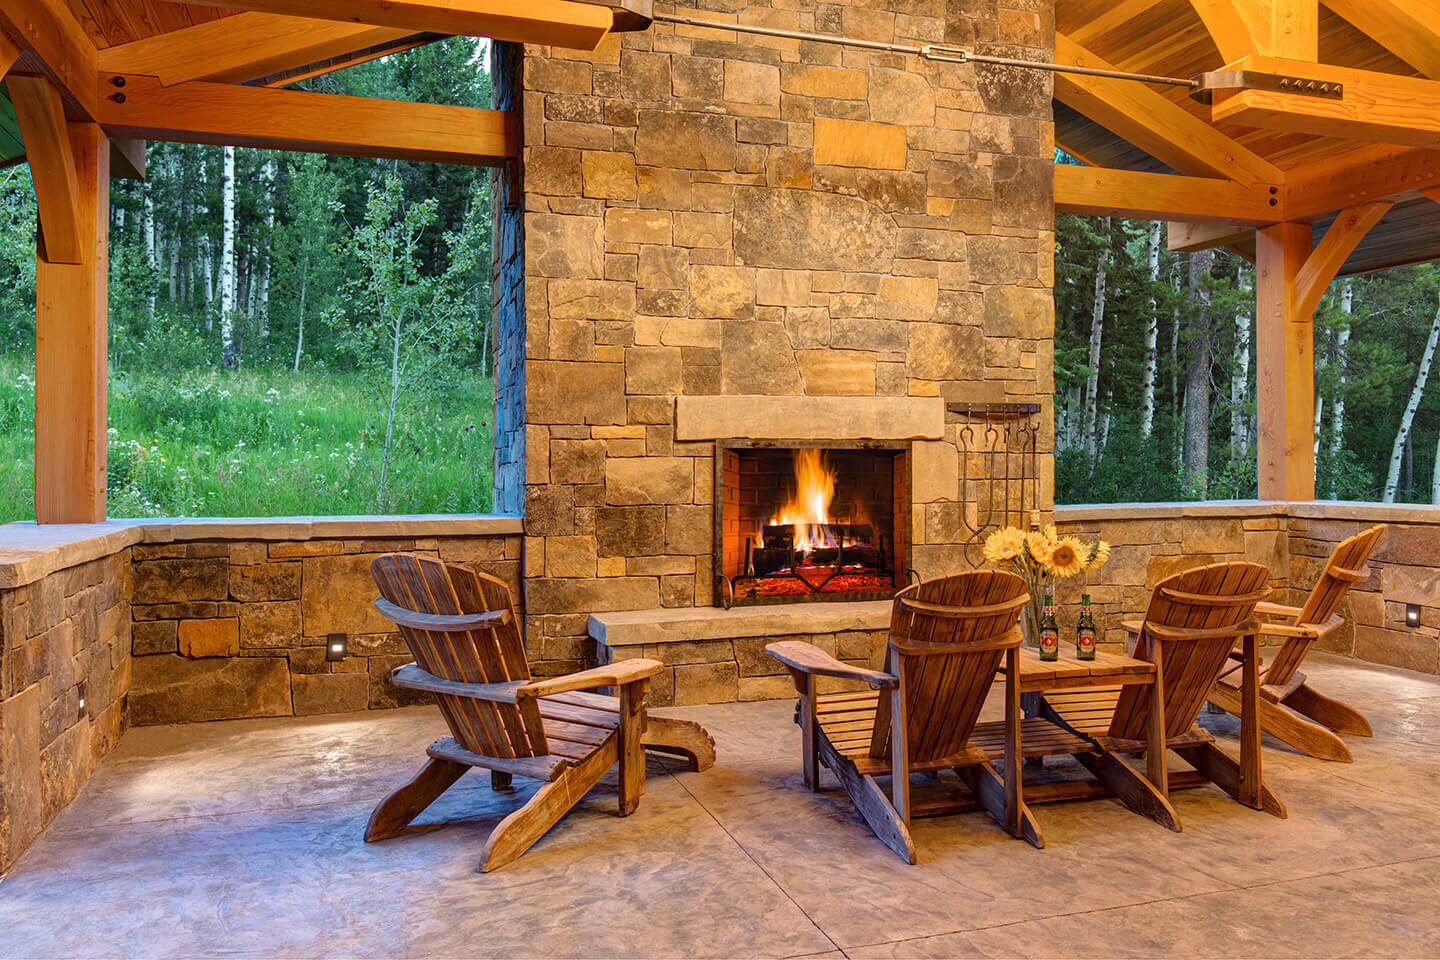 Outdoors stone fireplace with Adirondack chairs